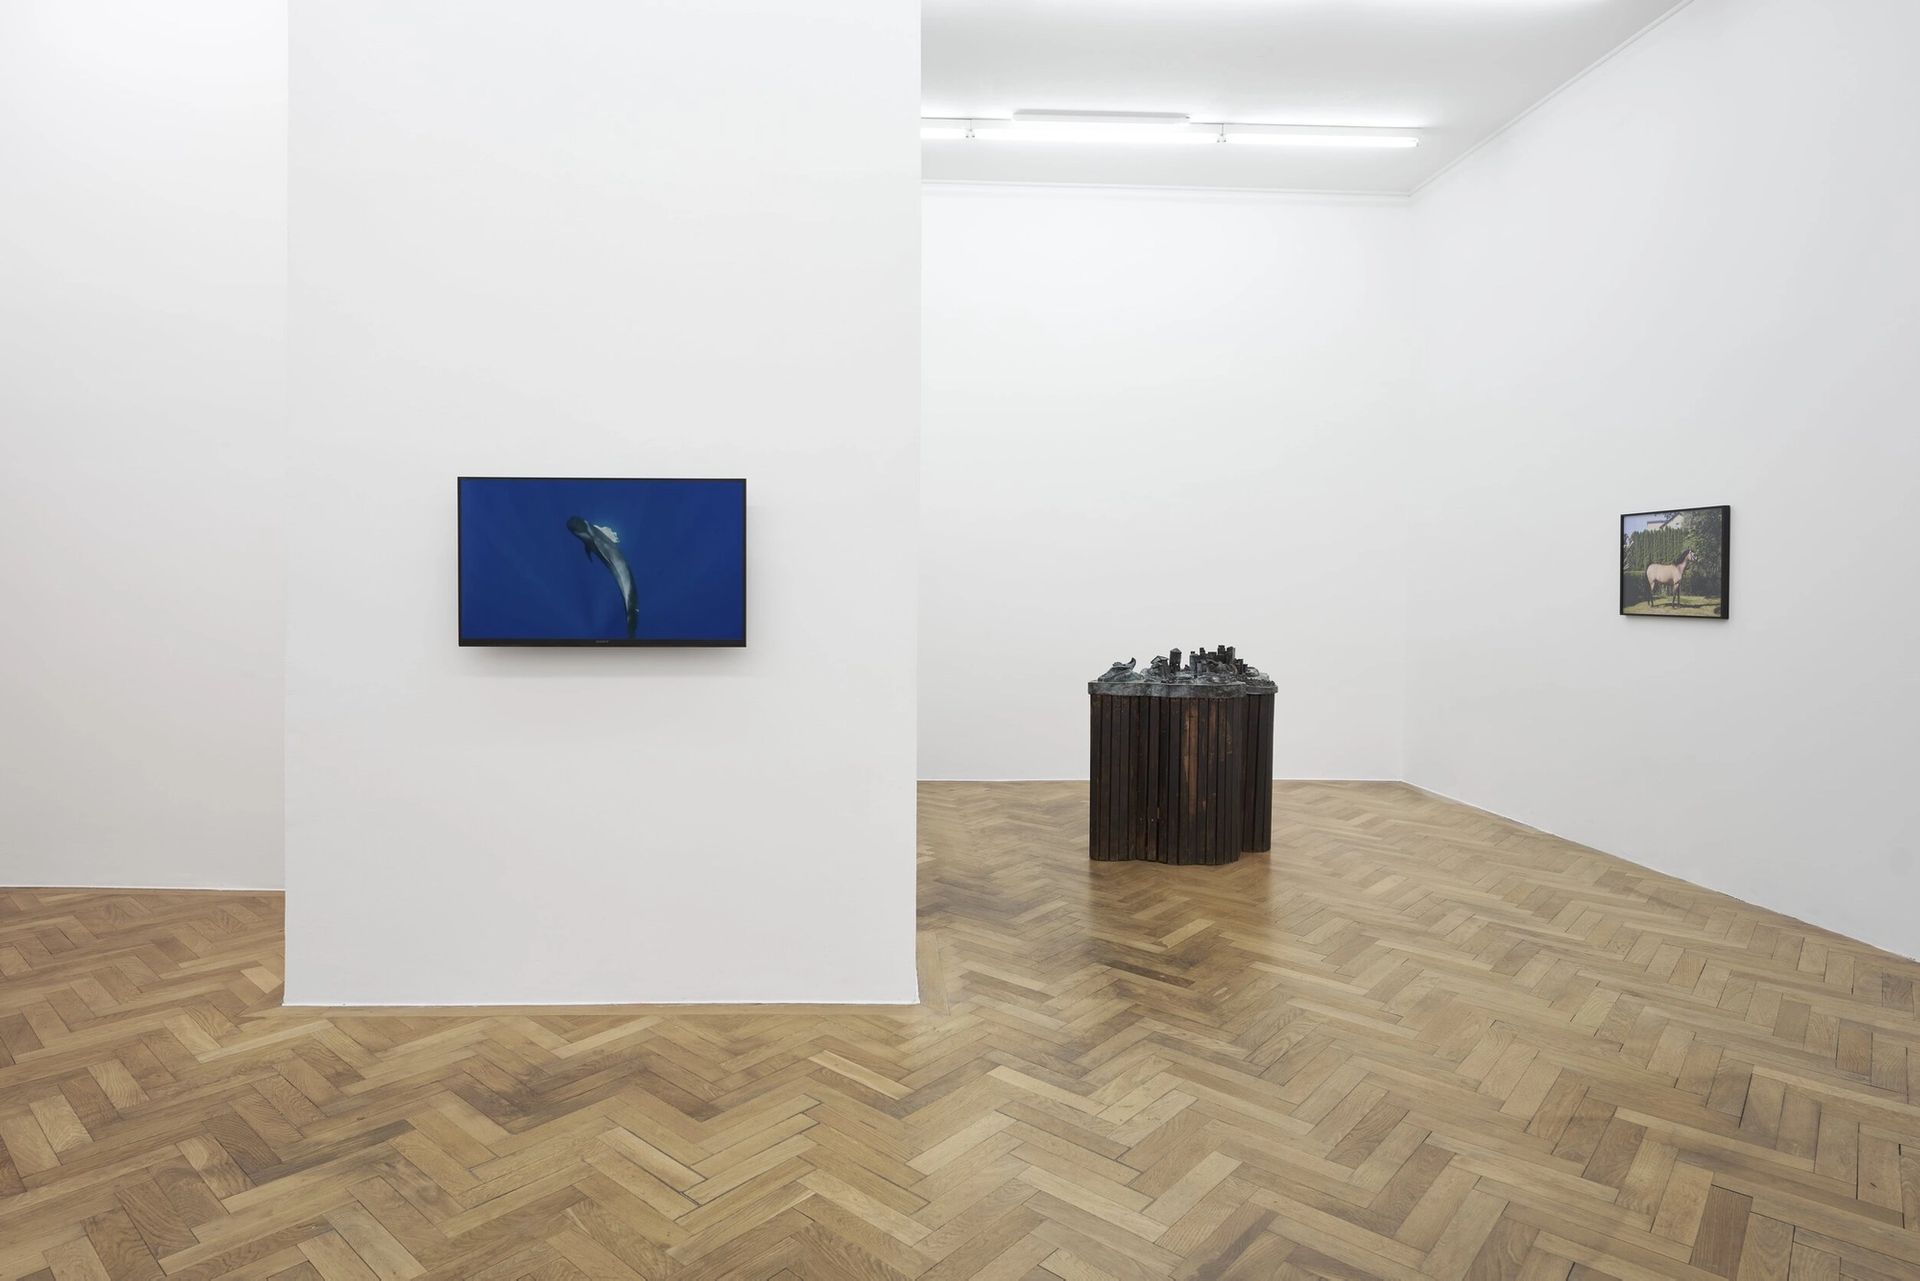 Installation view: „Various Others 2020“, Lena Henke, Dominique Knowels, Megan Francis Sullivan in cooperation with Galerie Emanuel Layr, photo: Ulrich Gebert